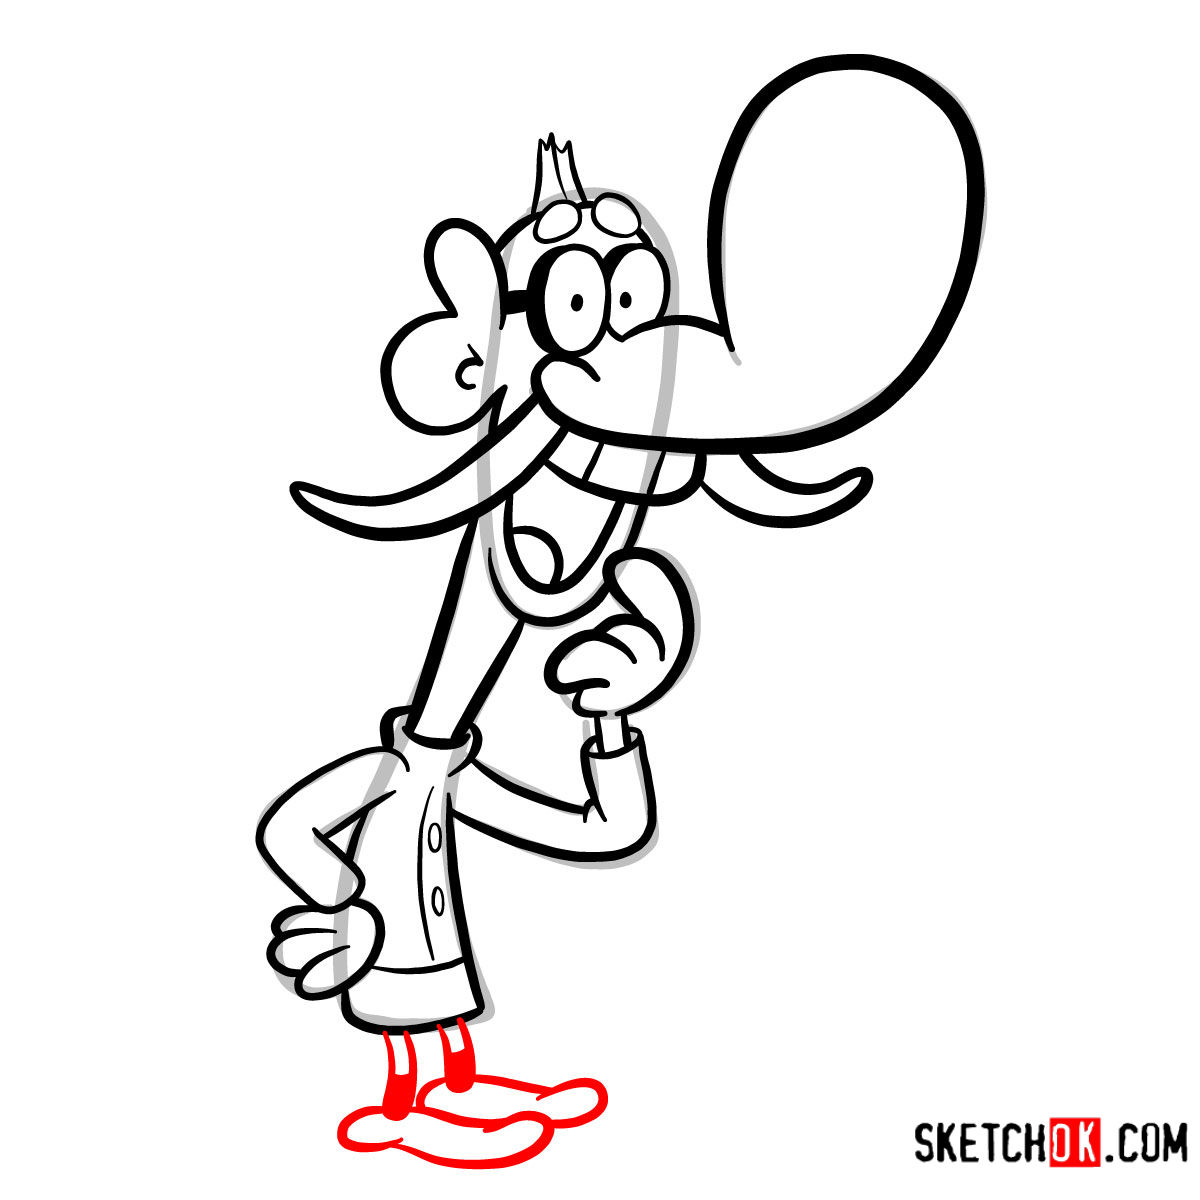 How to draw Mung Daal from Chowder series - step 10